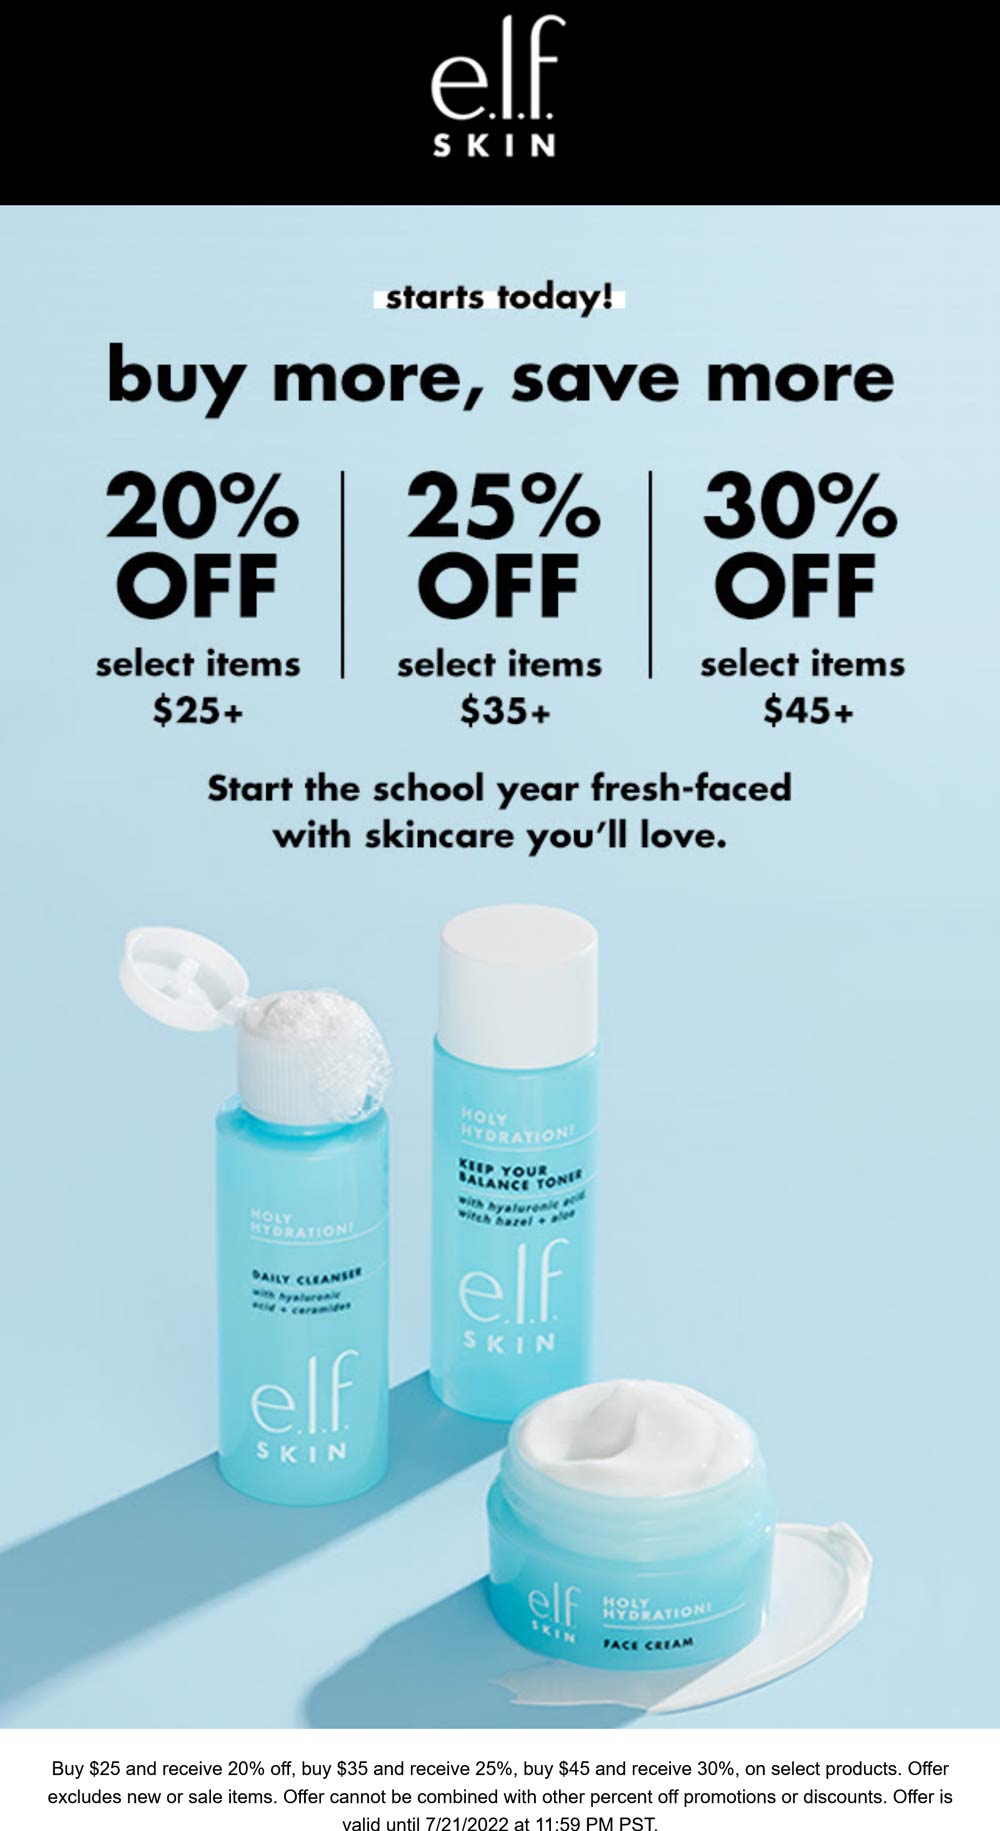 e.l.f. Cosmetics coupons & promo code for [December 2022]